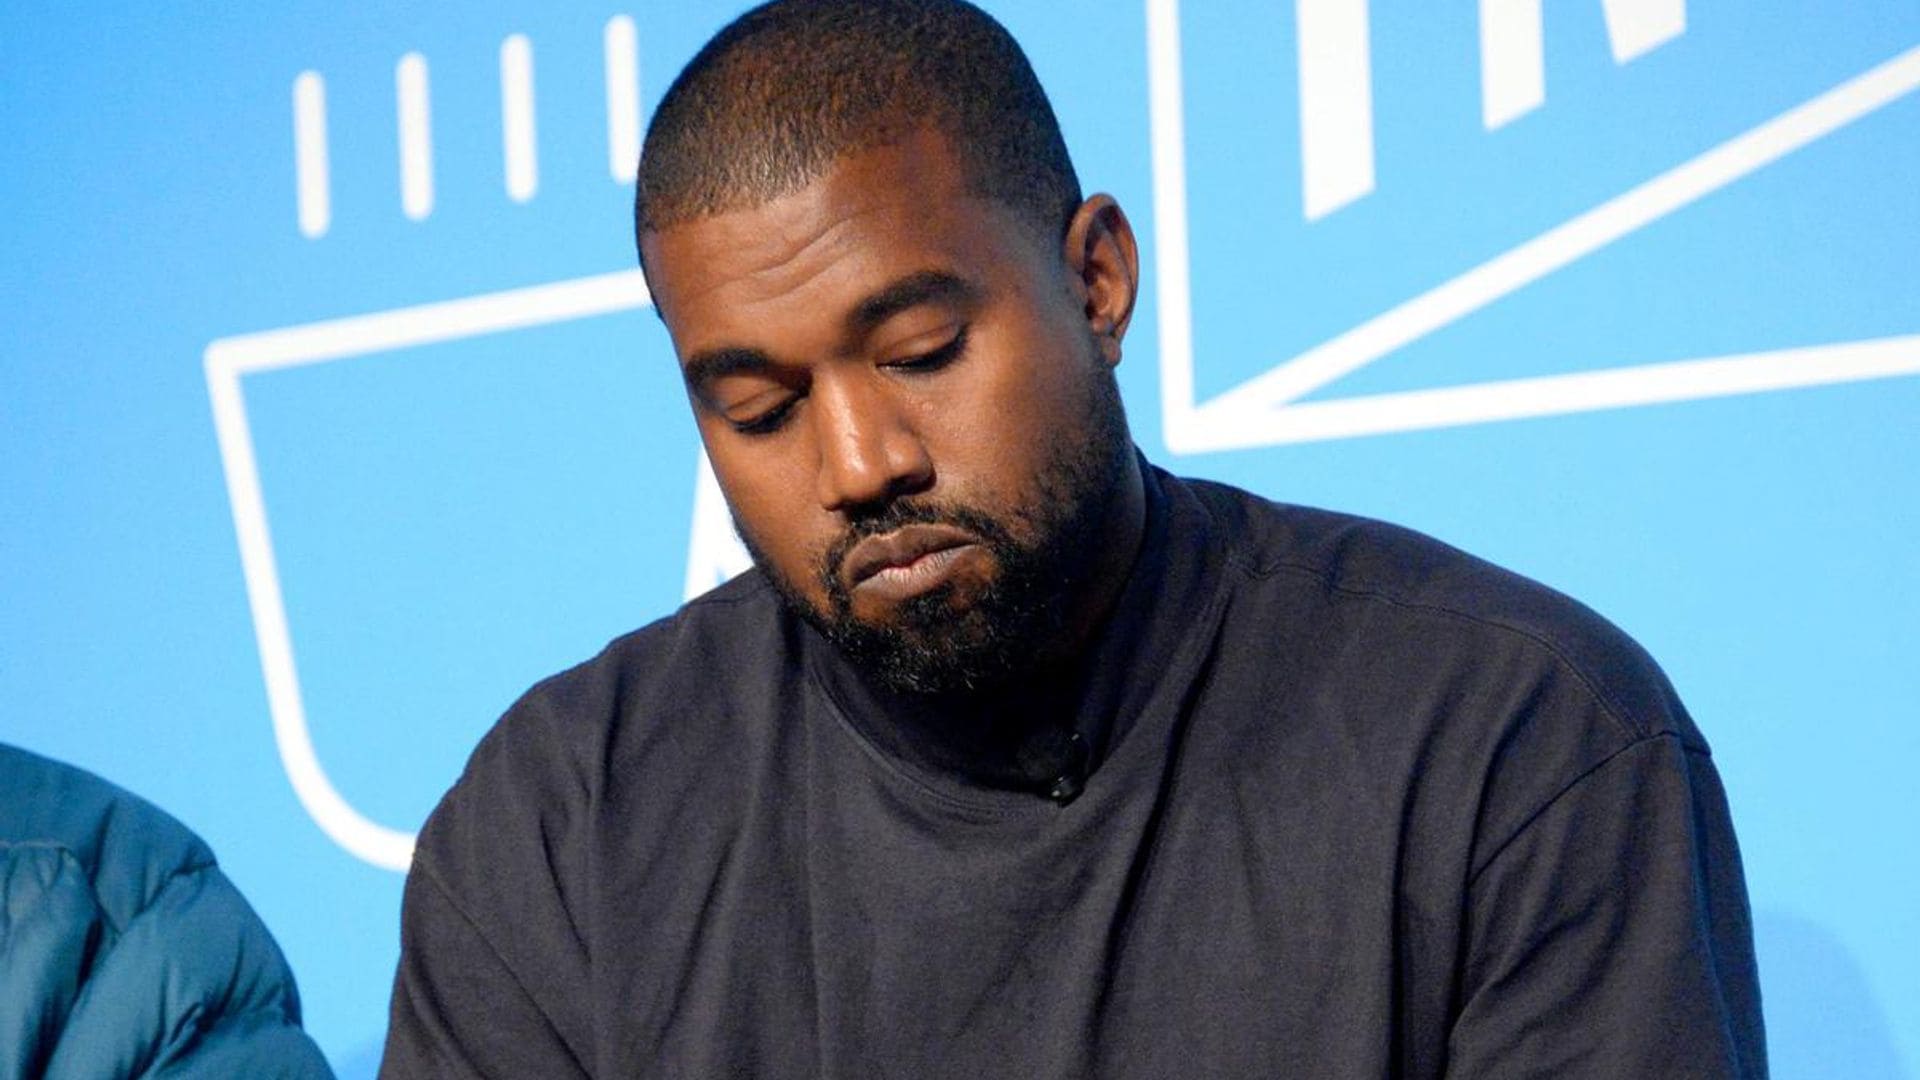 Why Kanye West is banned from performing at the Grammy Awards despite being nominated